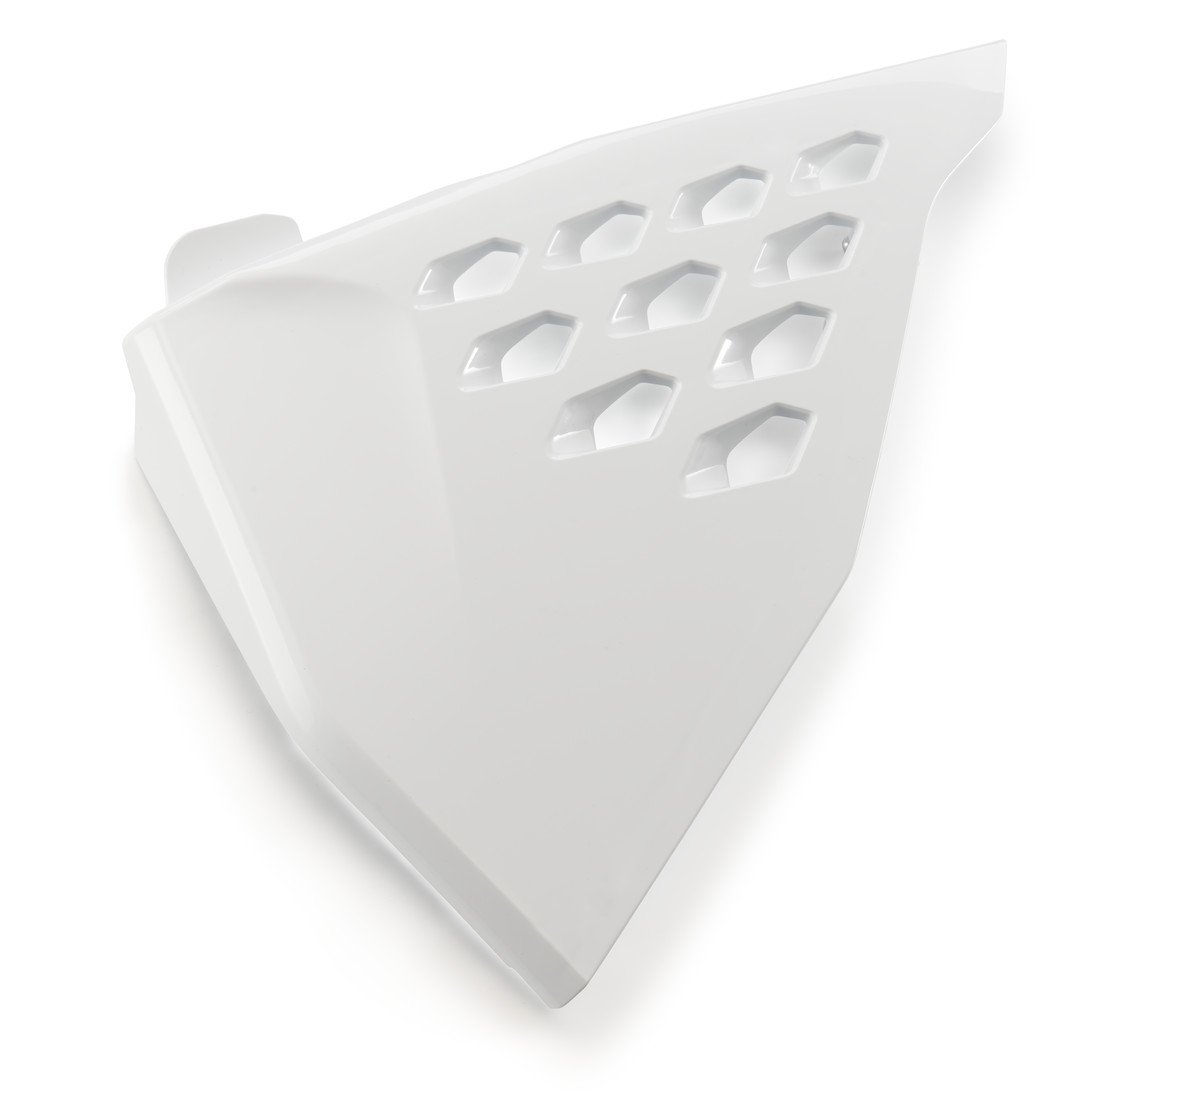 Main image of KTM Vented Air Box Cover 19-22 (White)